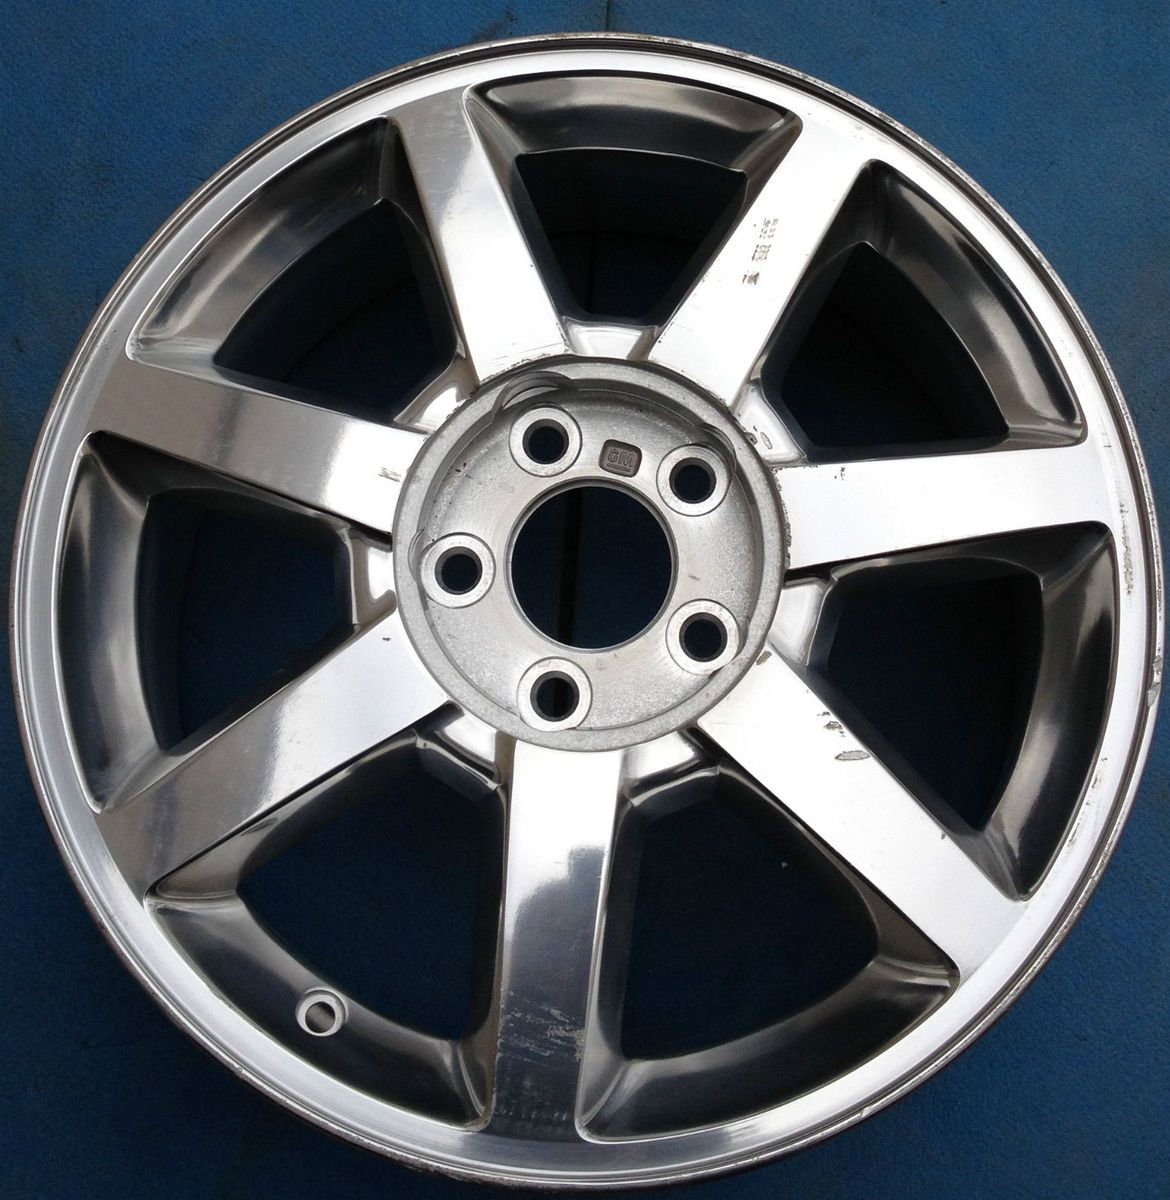 One 04 11 Cadillac cts STS 17 x 7 5 Factory Wheel Rim Polished 4610